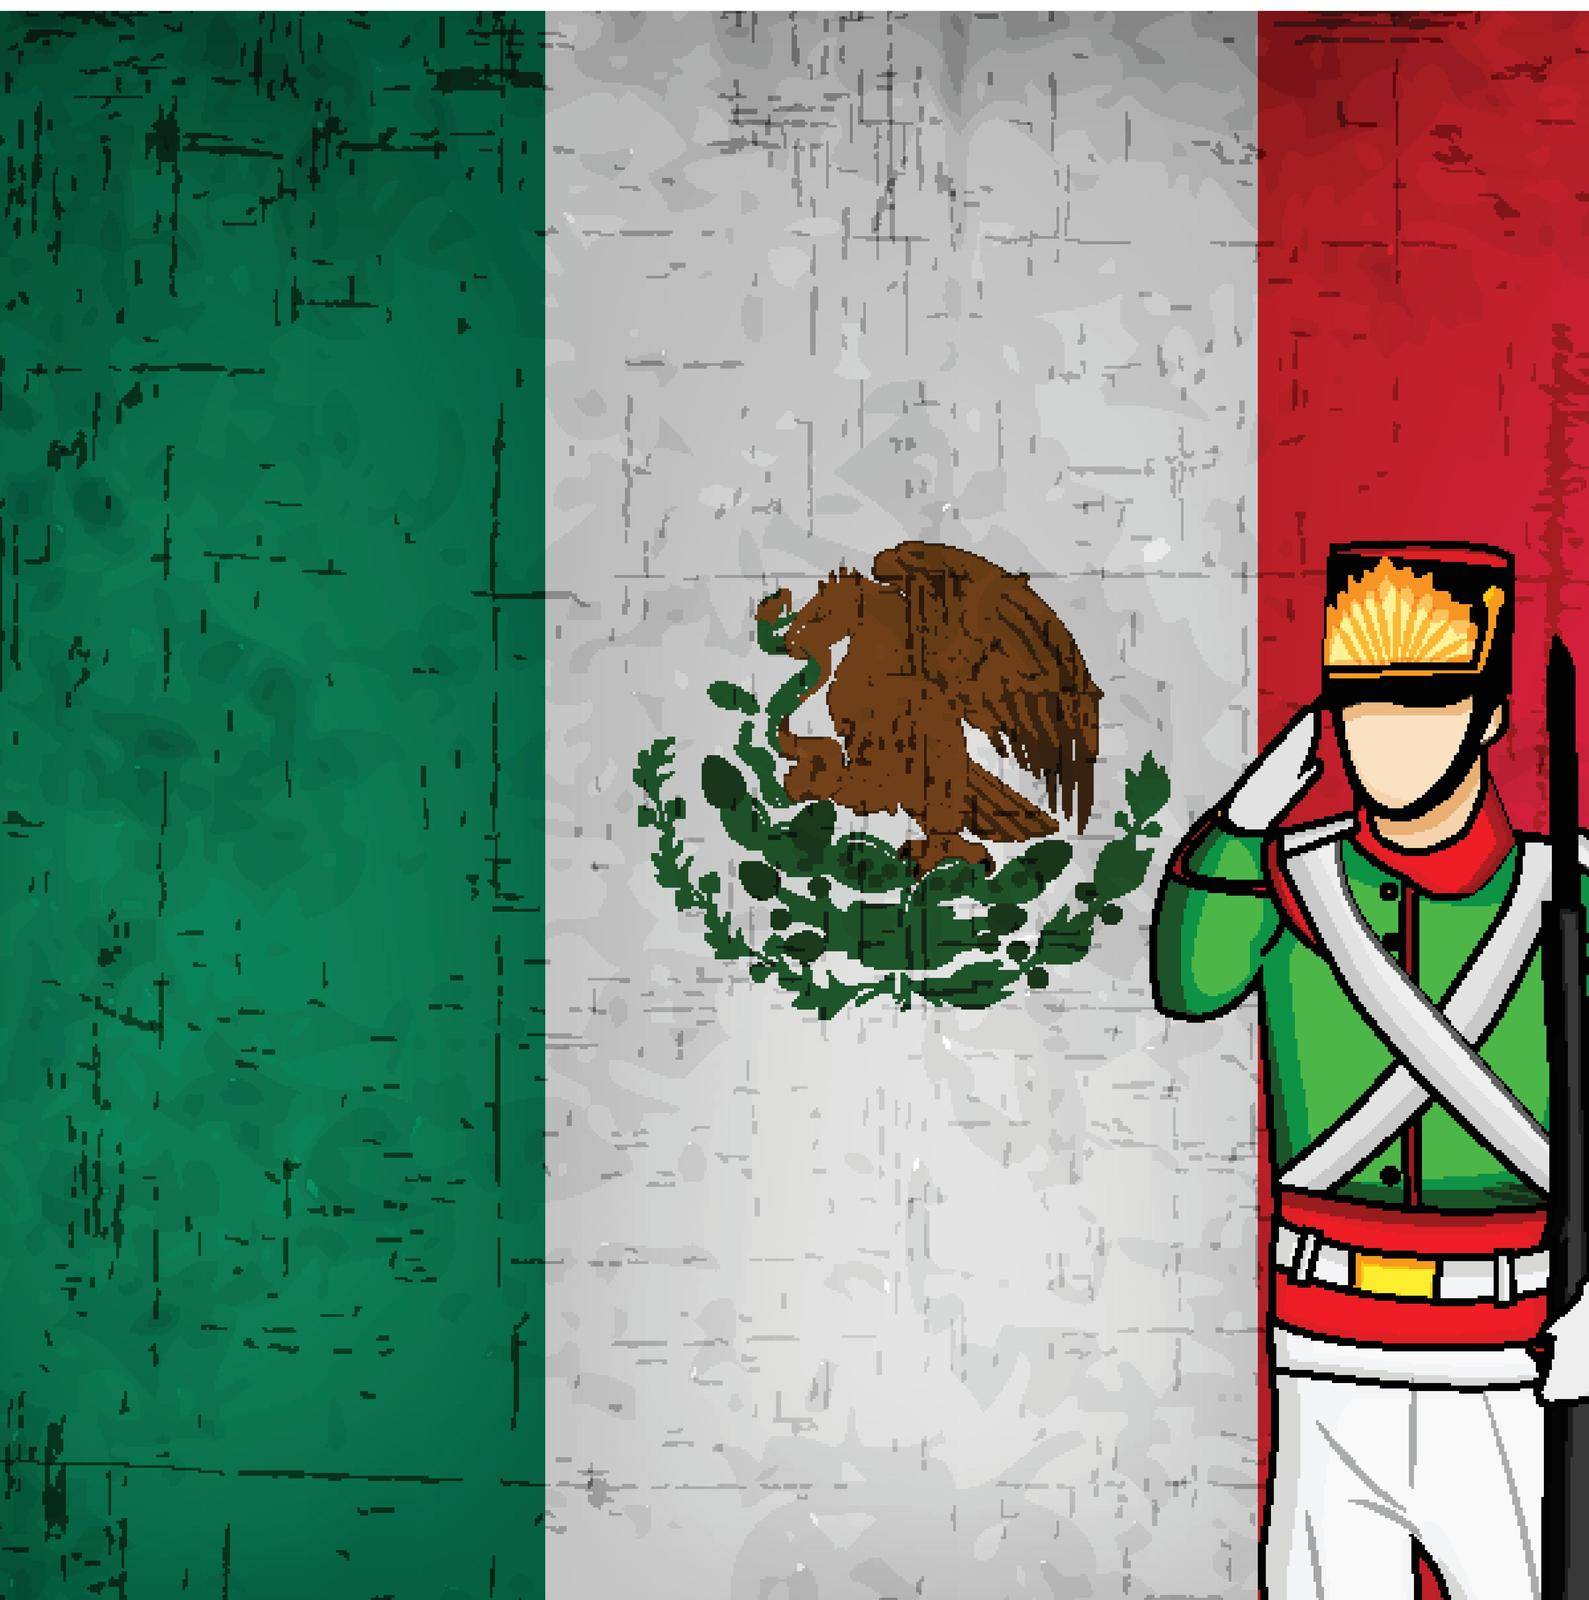 illustration of Mexico Independence Day Background by vectorworld